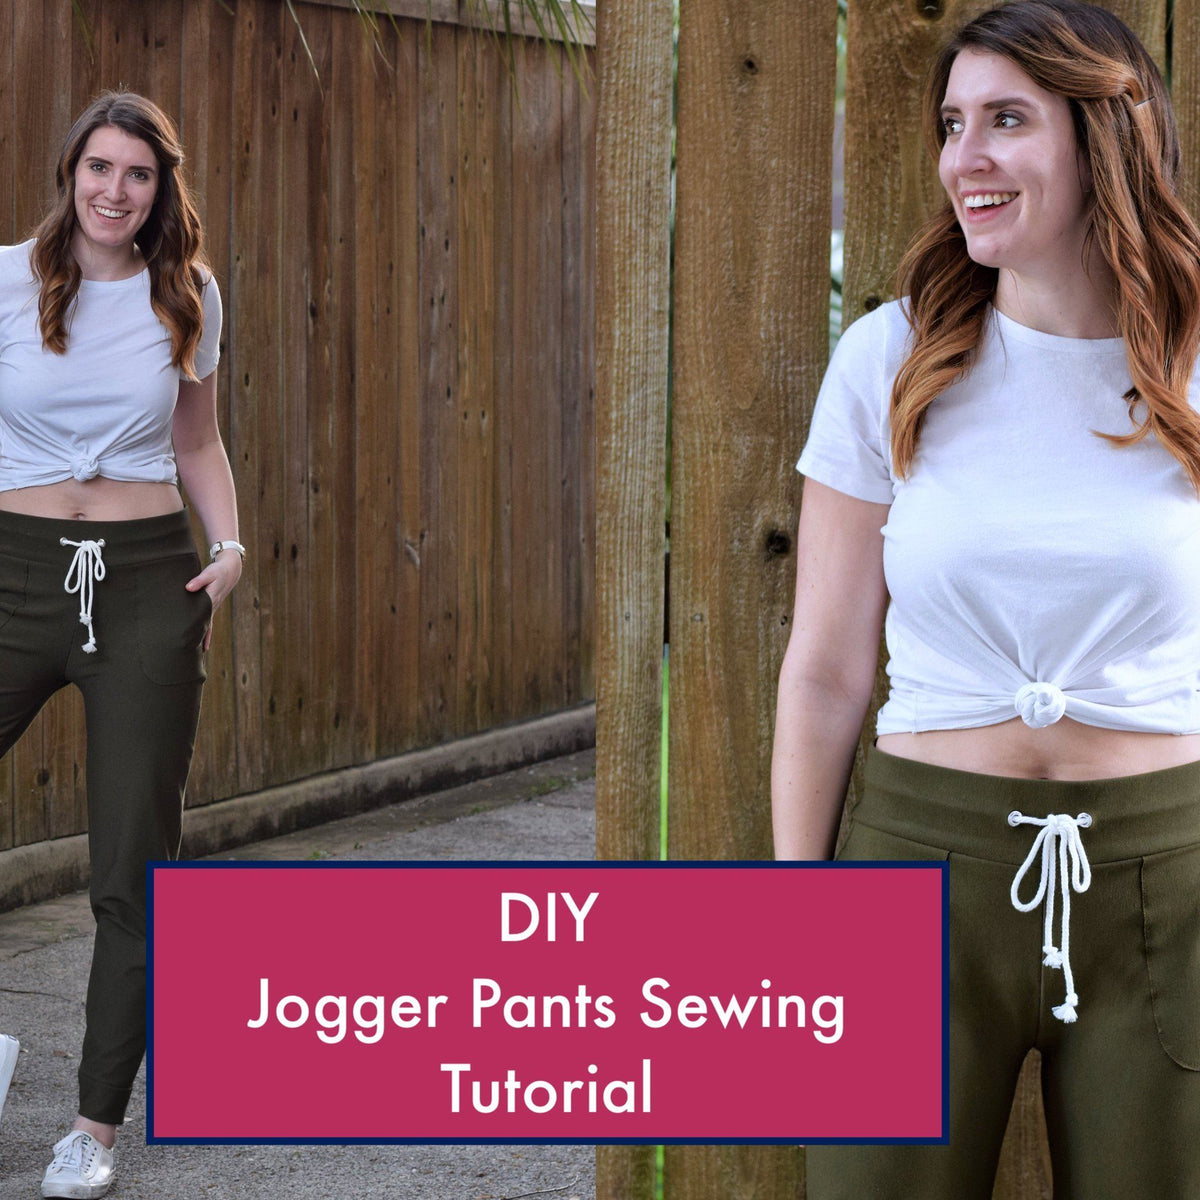 DIY Jogger Jeans Tutorial: Quick, Easy and Affordable Hack